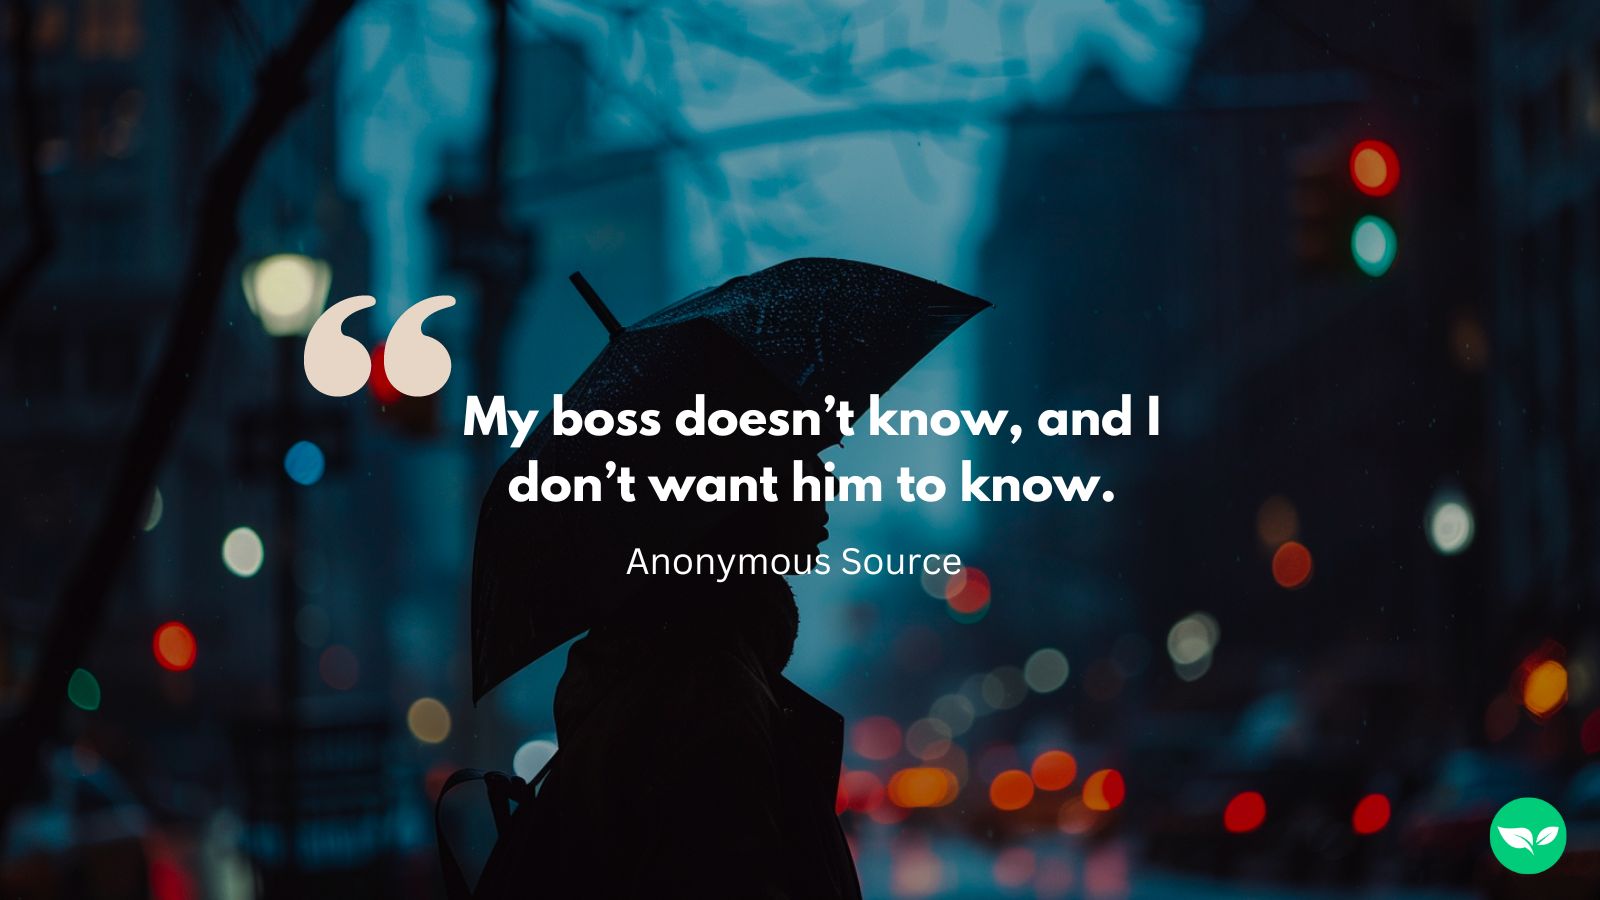 A graphic with the quote "My boss doesn't know, and I don't want him to know."